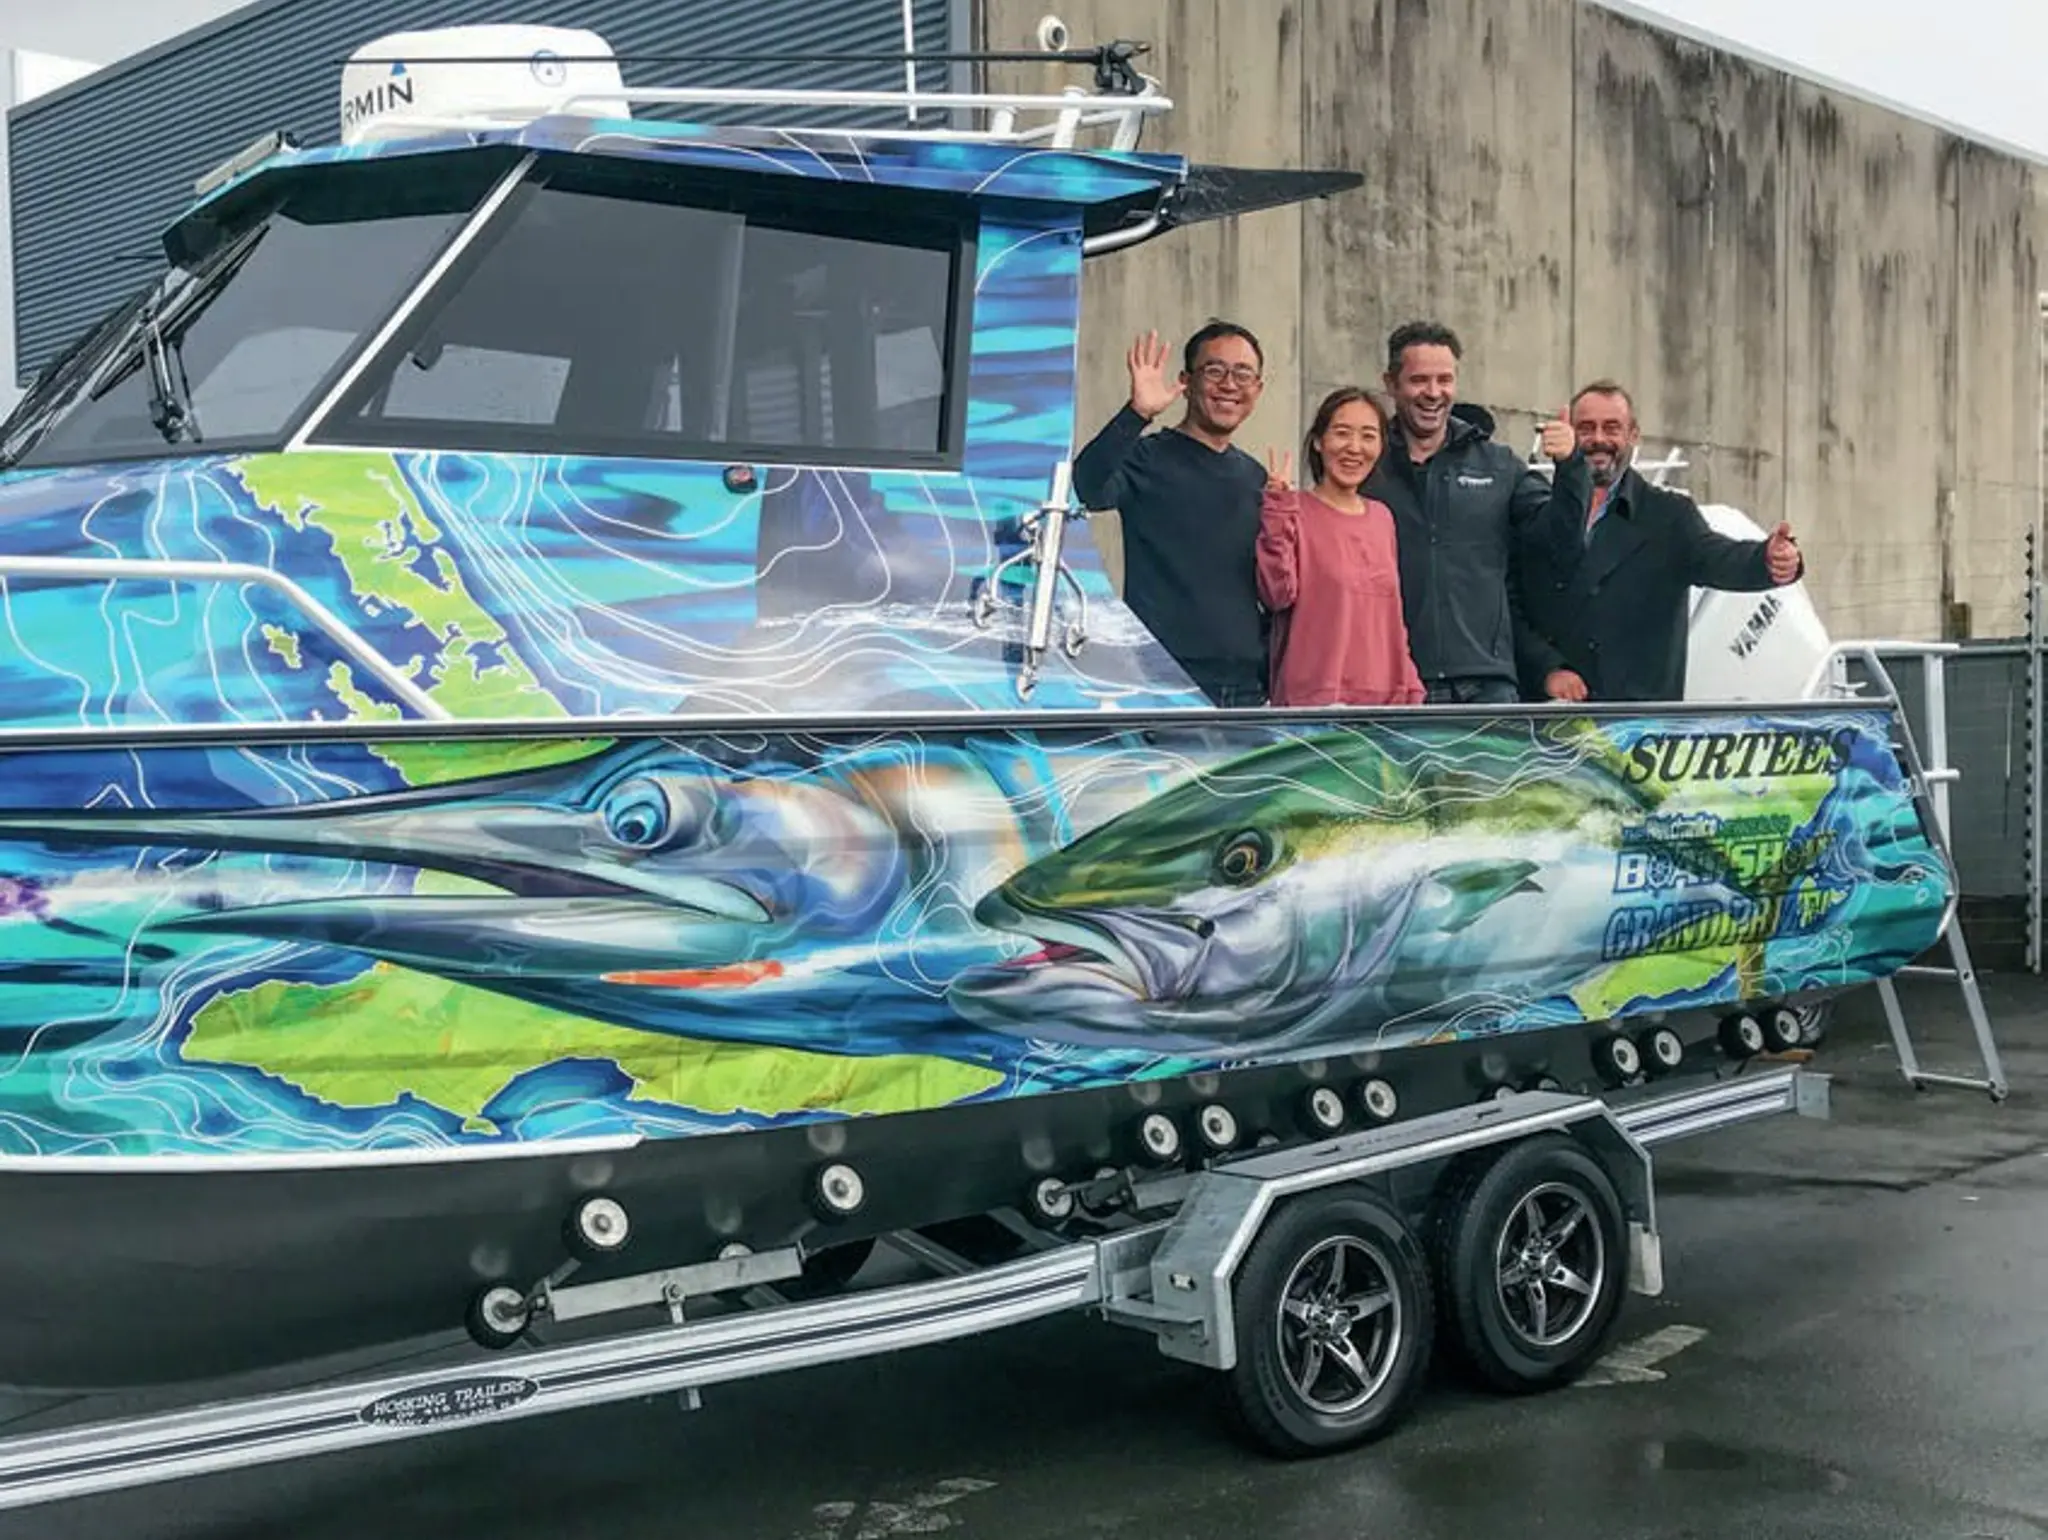 AUCKLAND FAMILY WINS $280,000 BOAT